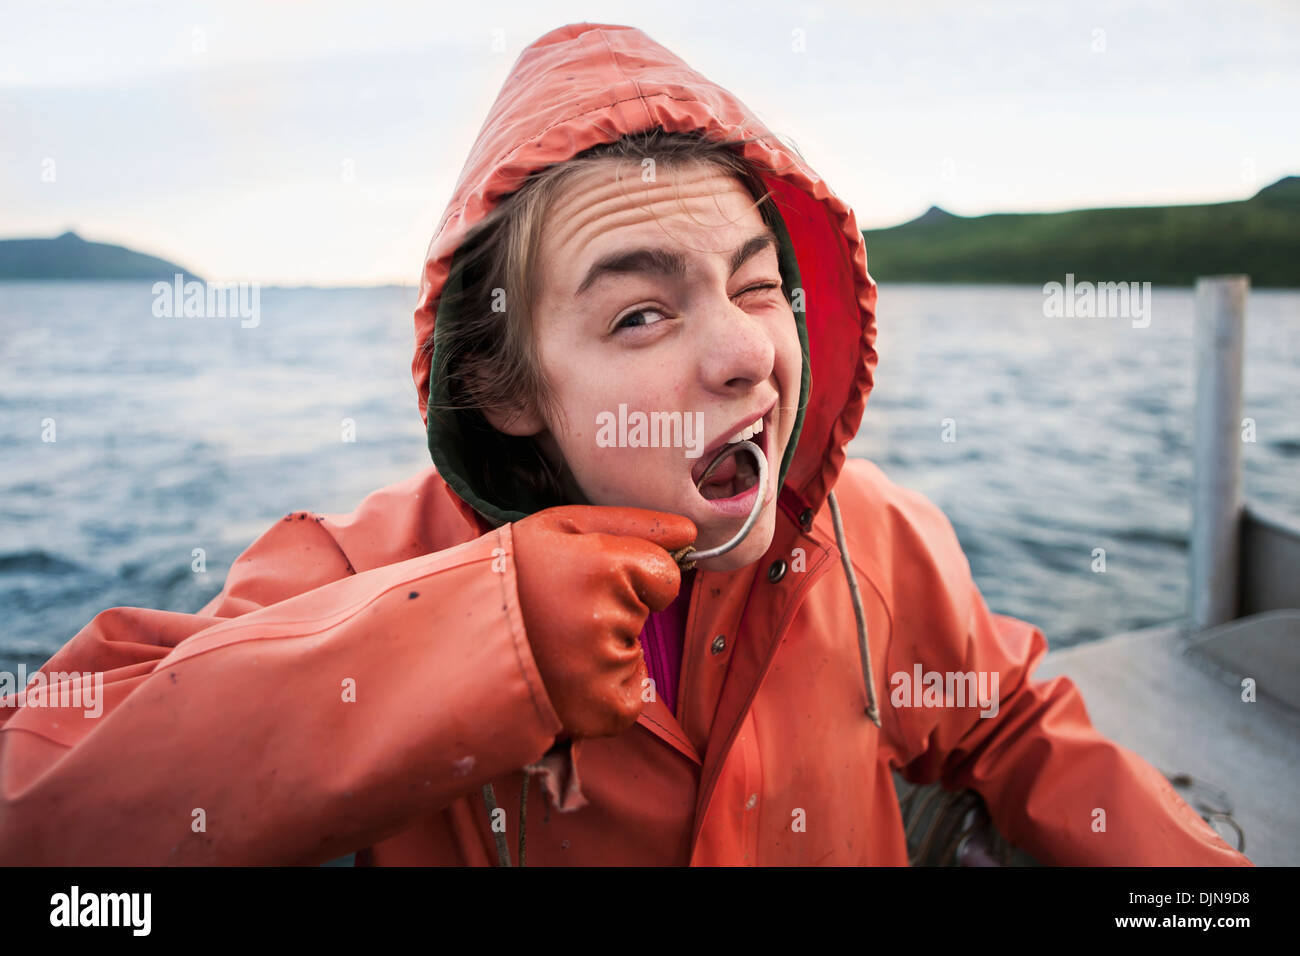 Claire Laukitis Is Hooked On Commercial Halibut Fishing, Southwest Alaska, Summer. Stock Photo